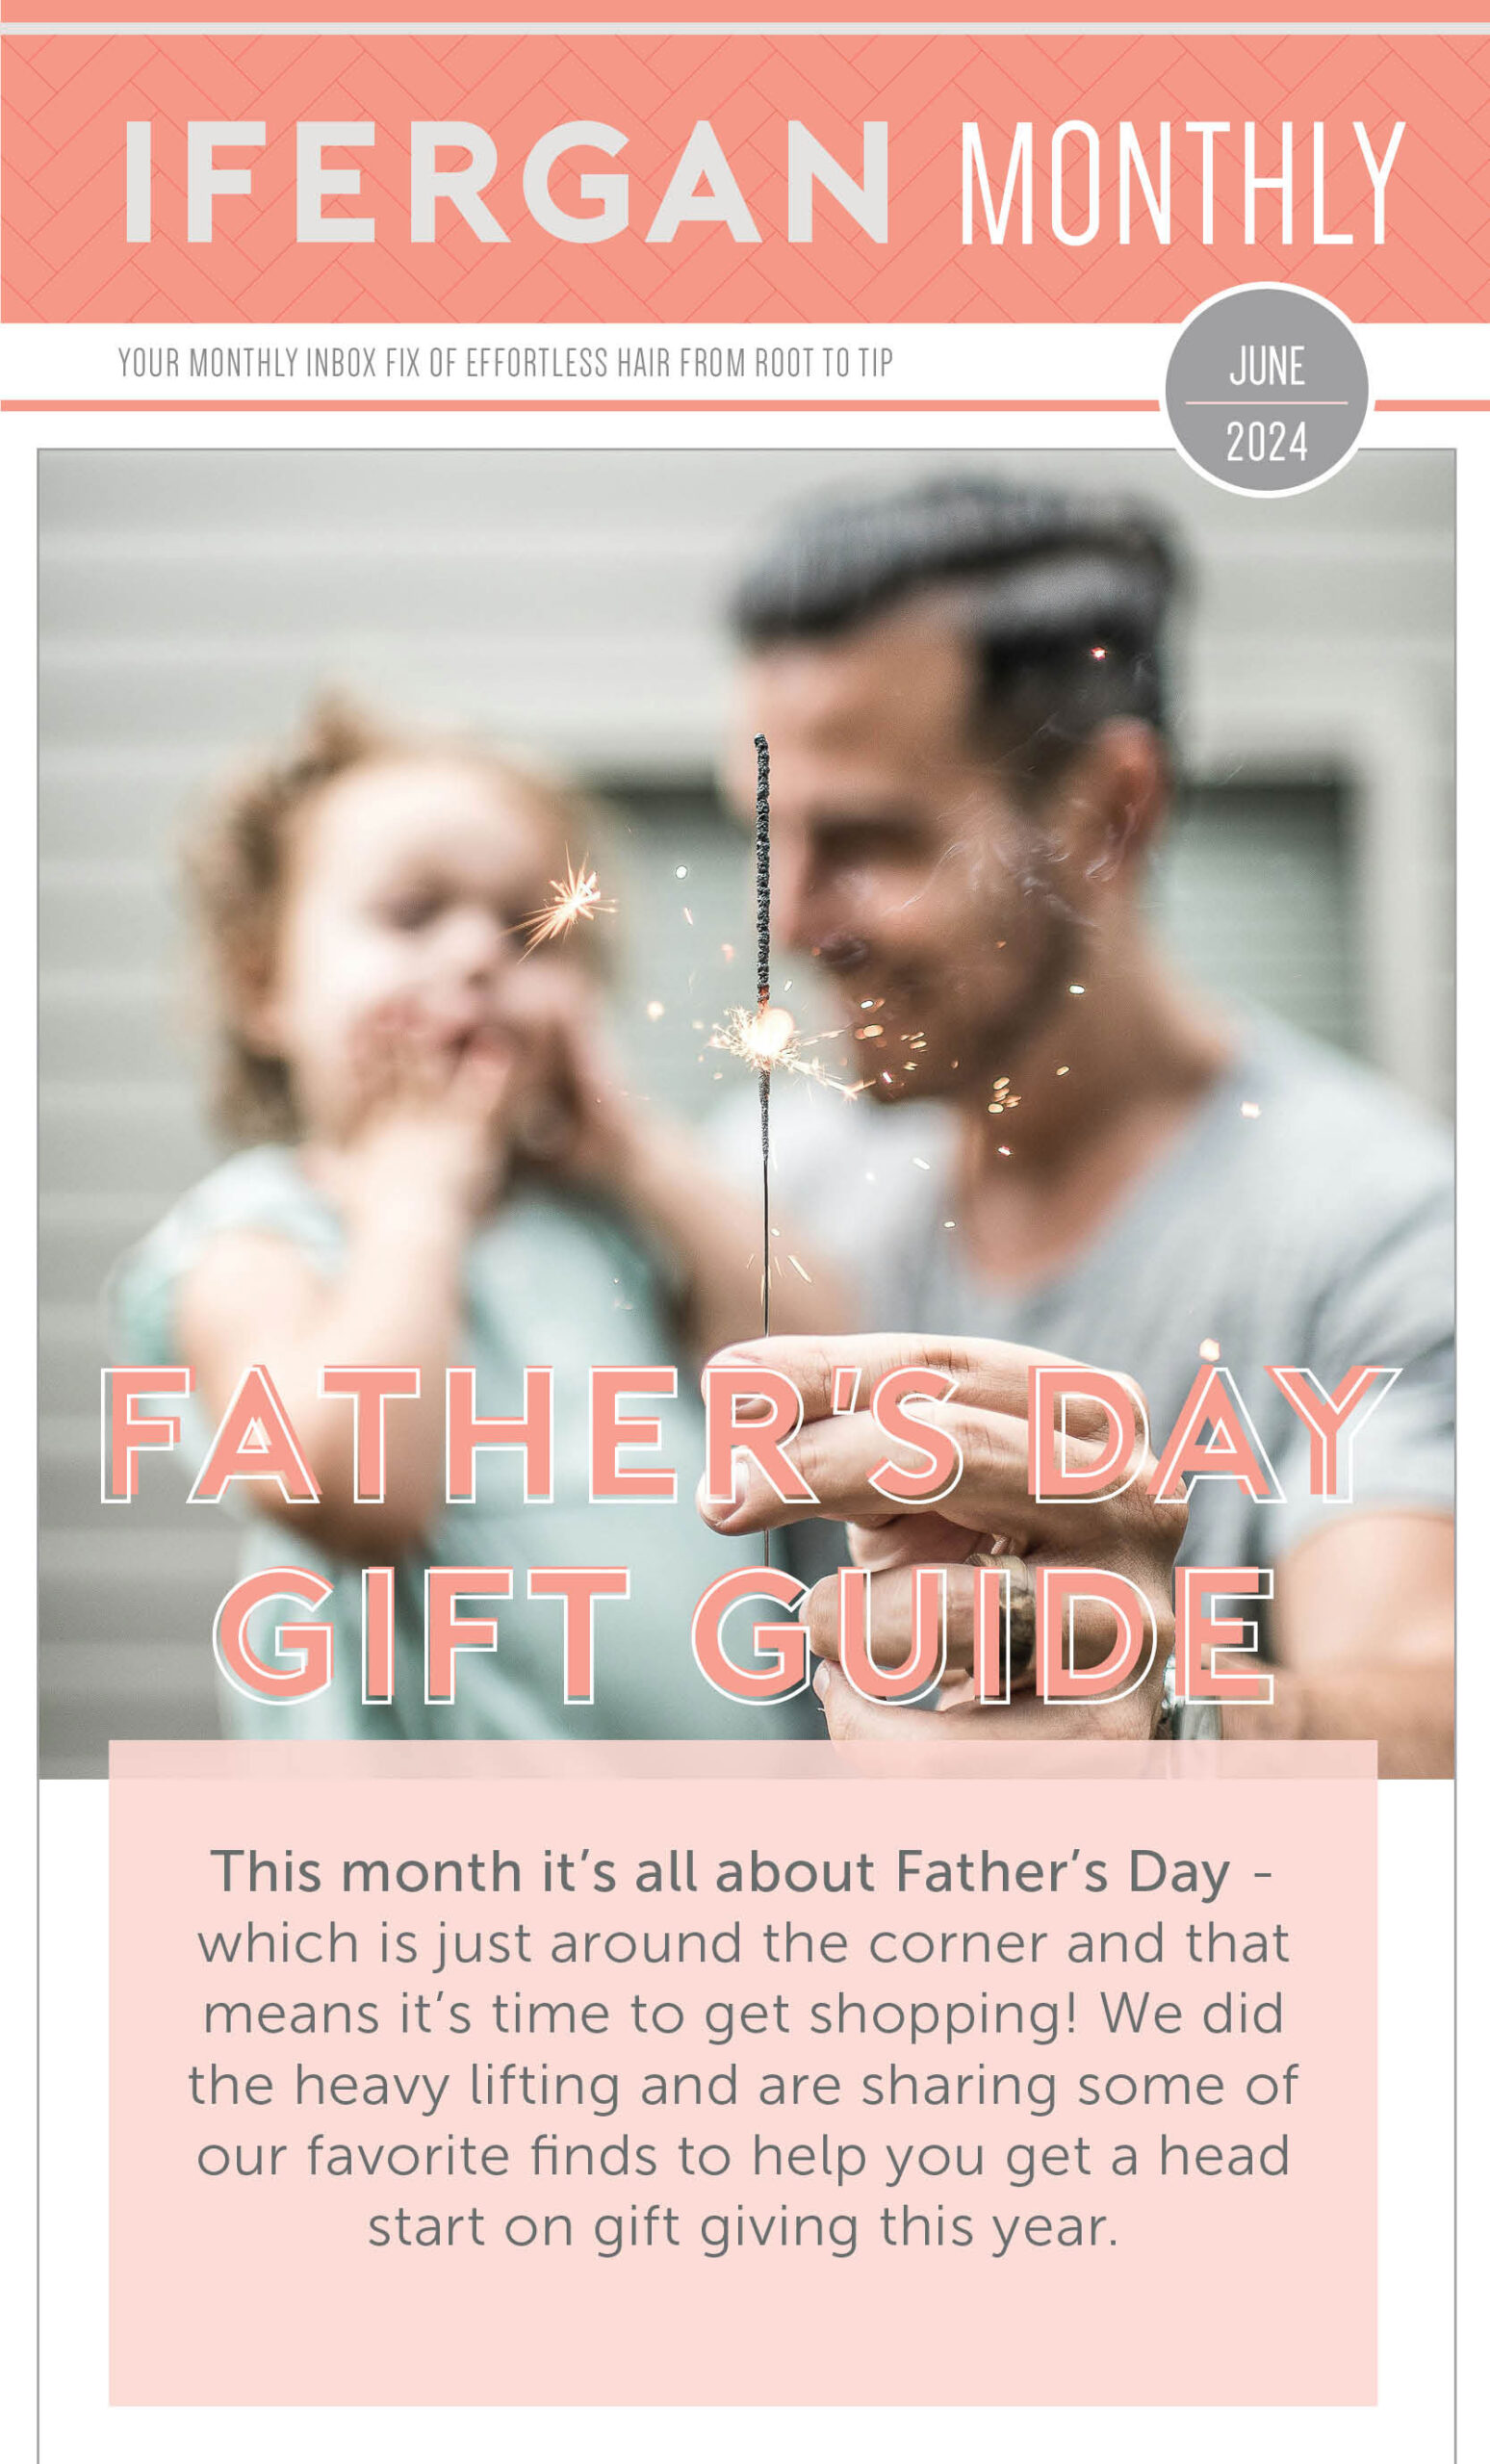 June 2024 Newsletter. Fathers Day Gift Guide. This month it’s all about Father’s Day - which is just around the corner and that means it’s time to get shopping! We did the heavy lifting and are sharing some of our favorite finds to help you get a head start on gift giving this year.